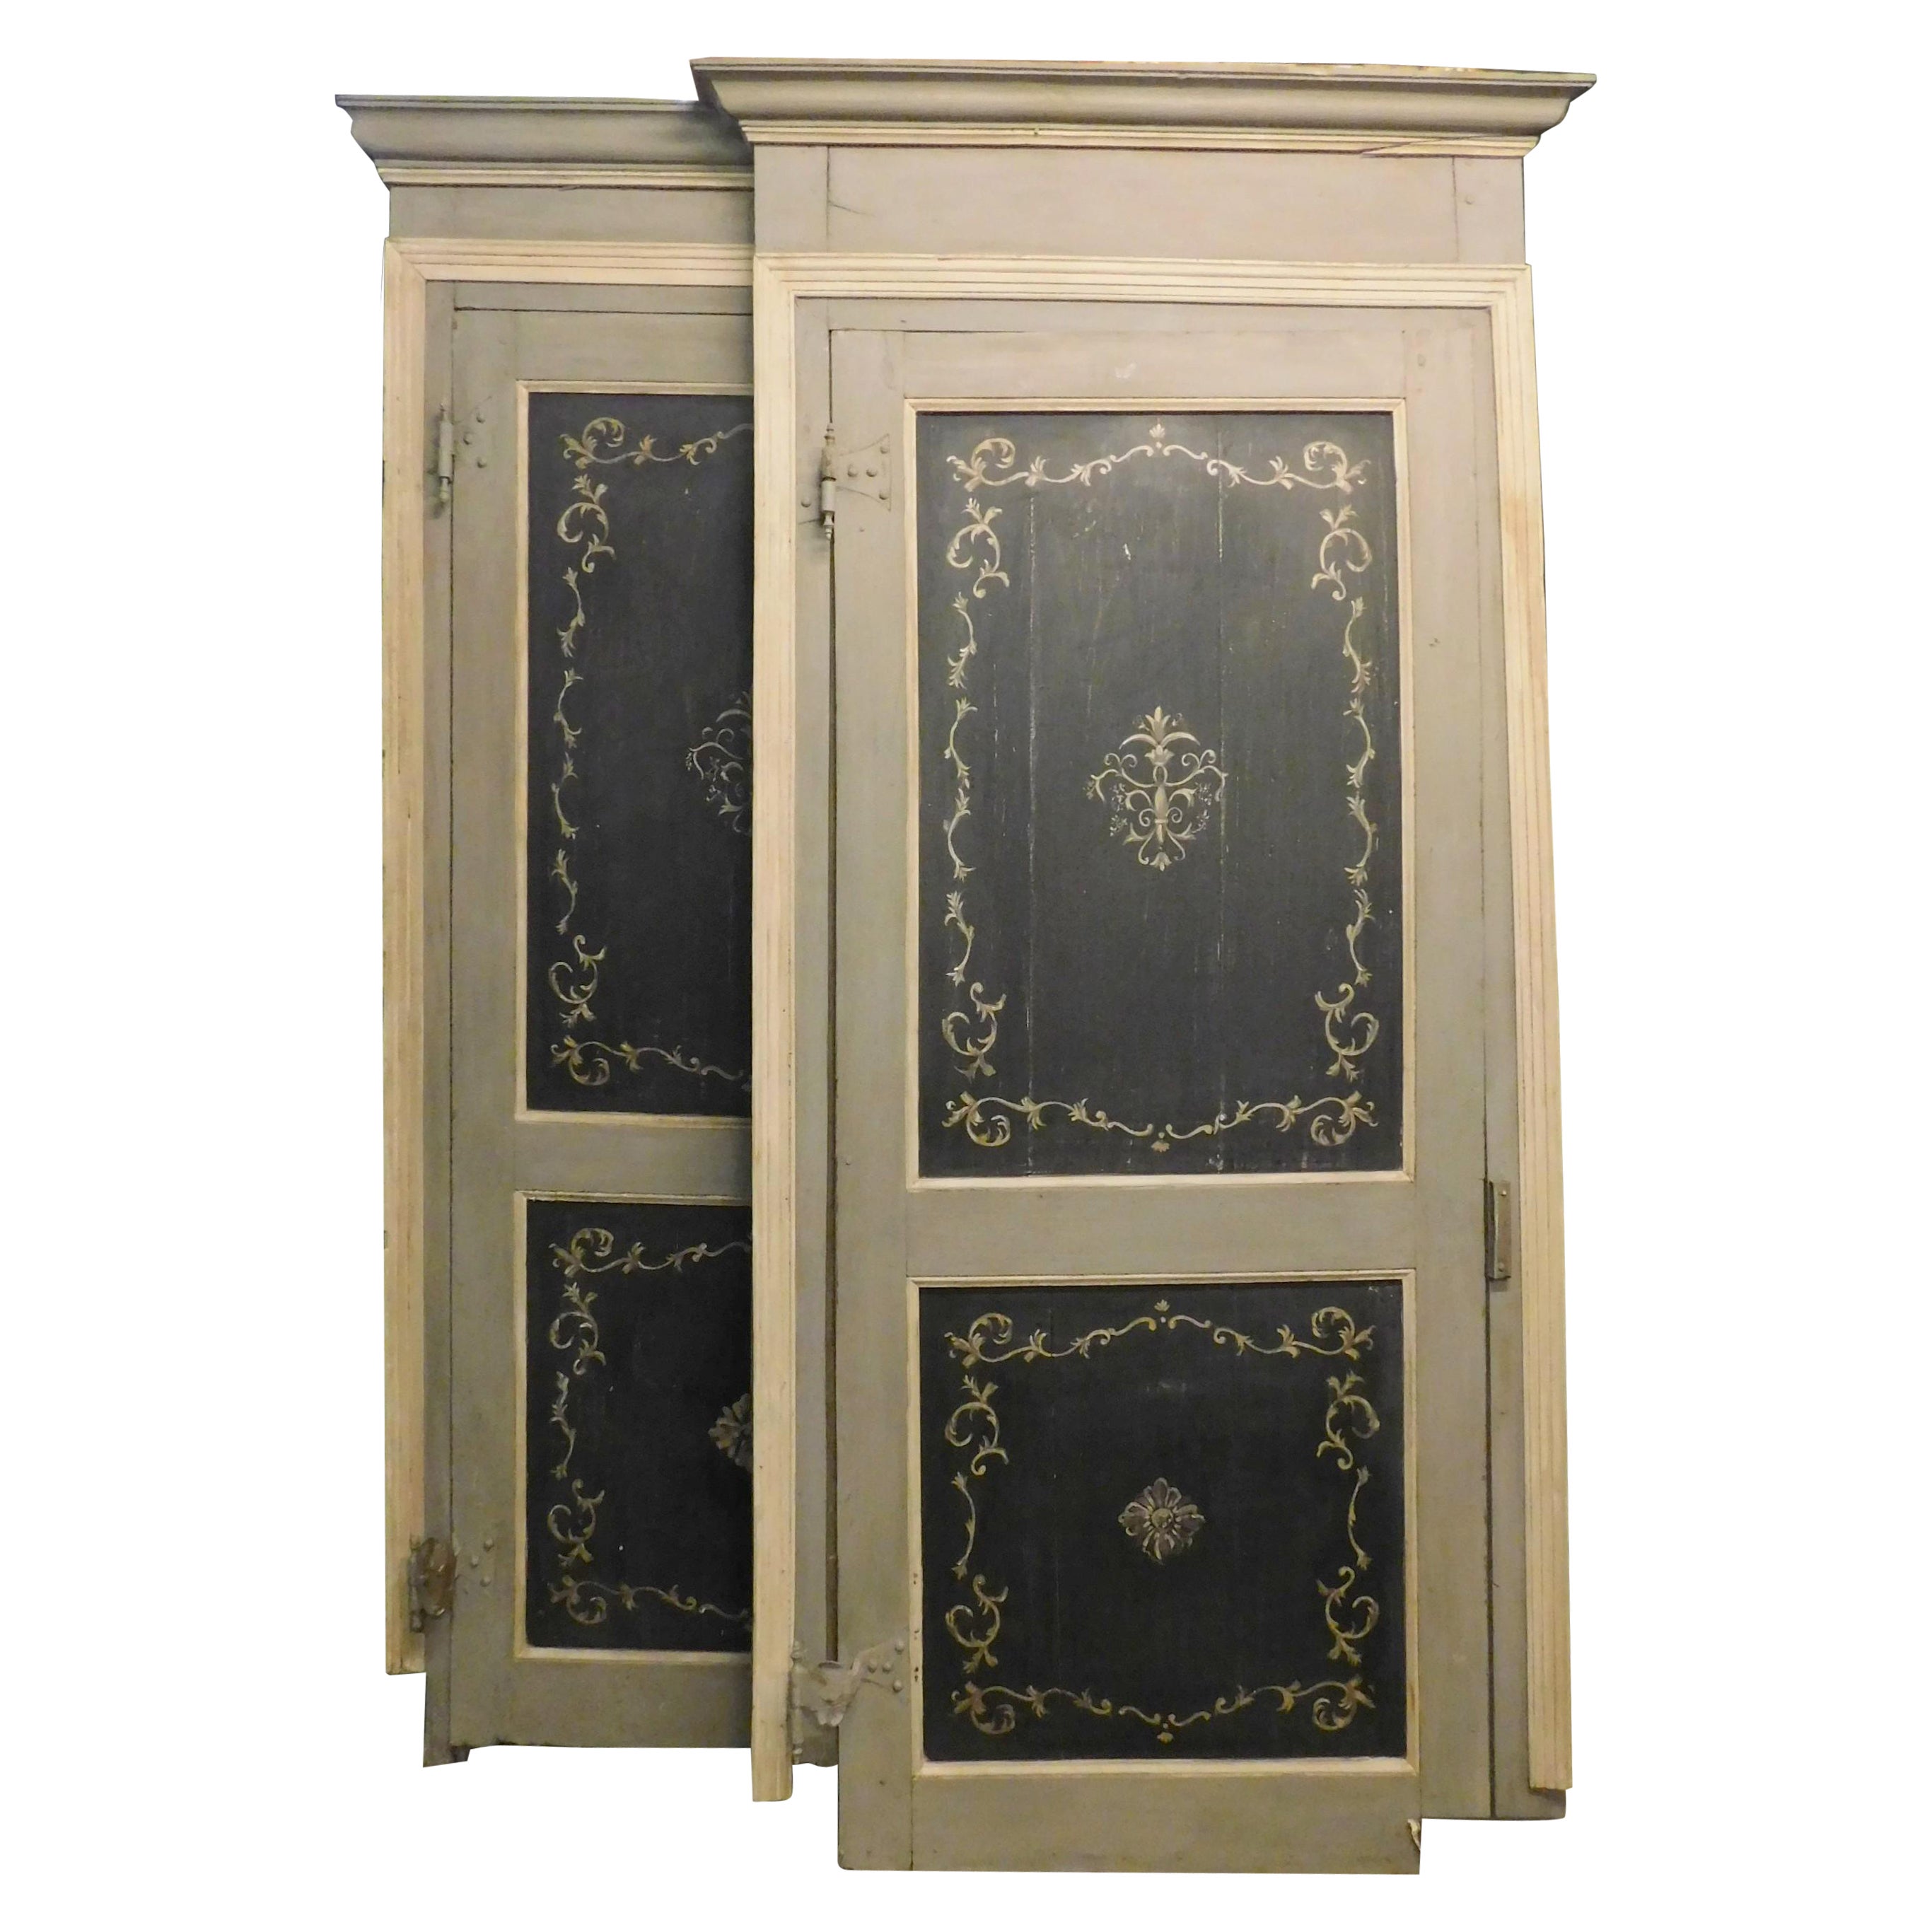 Pair of lacquered doors with frame, gray and black, 18th century Italy